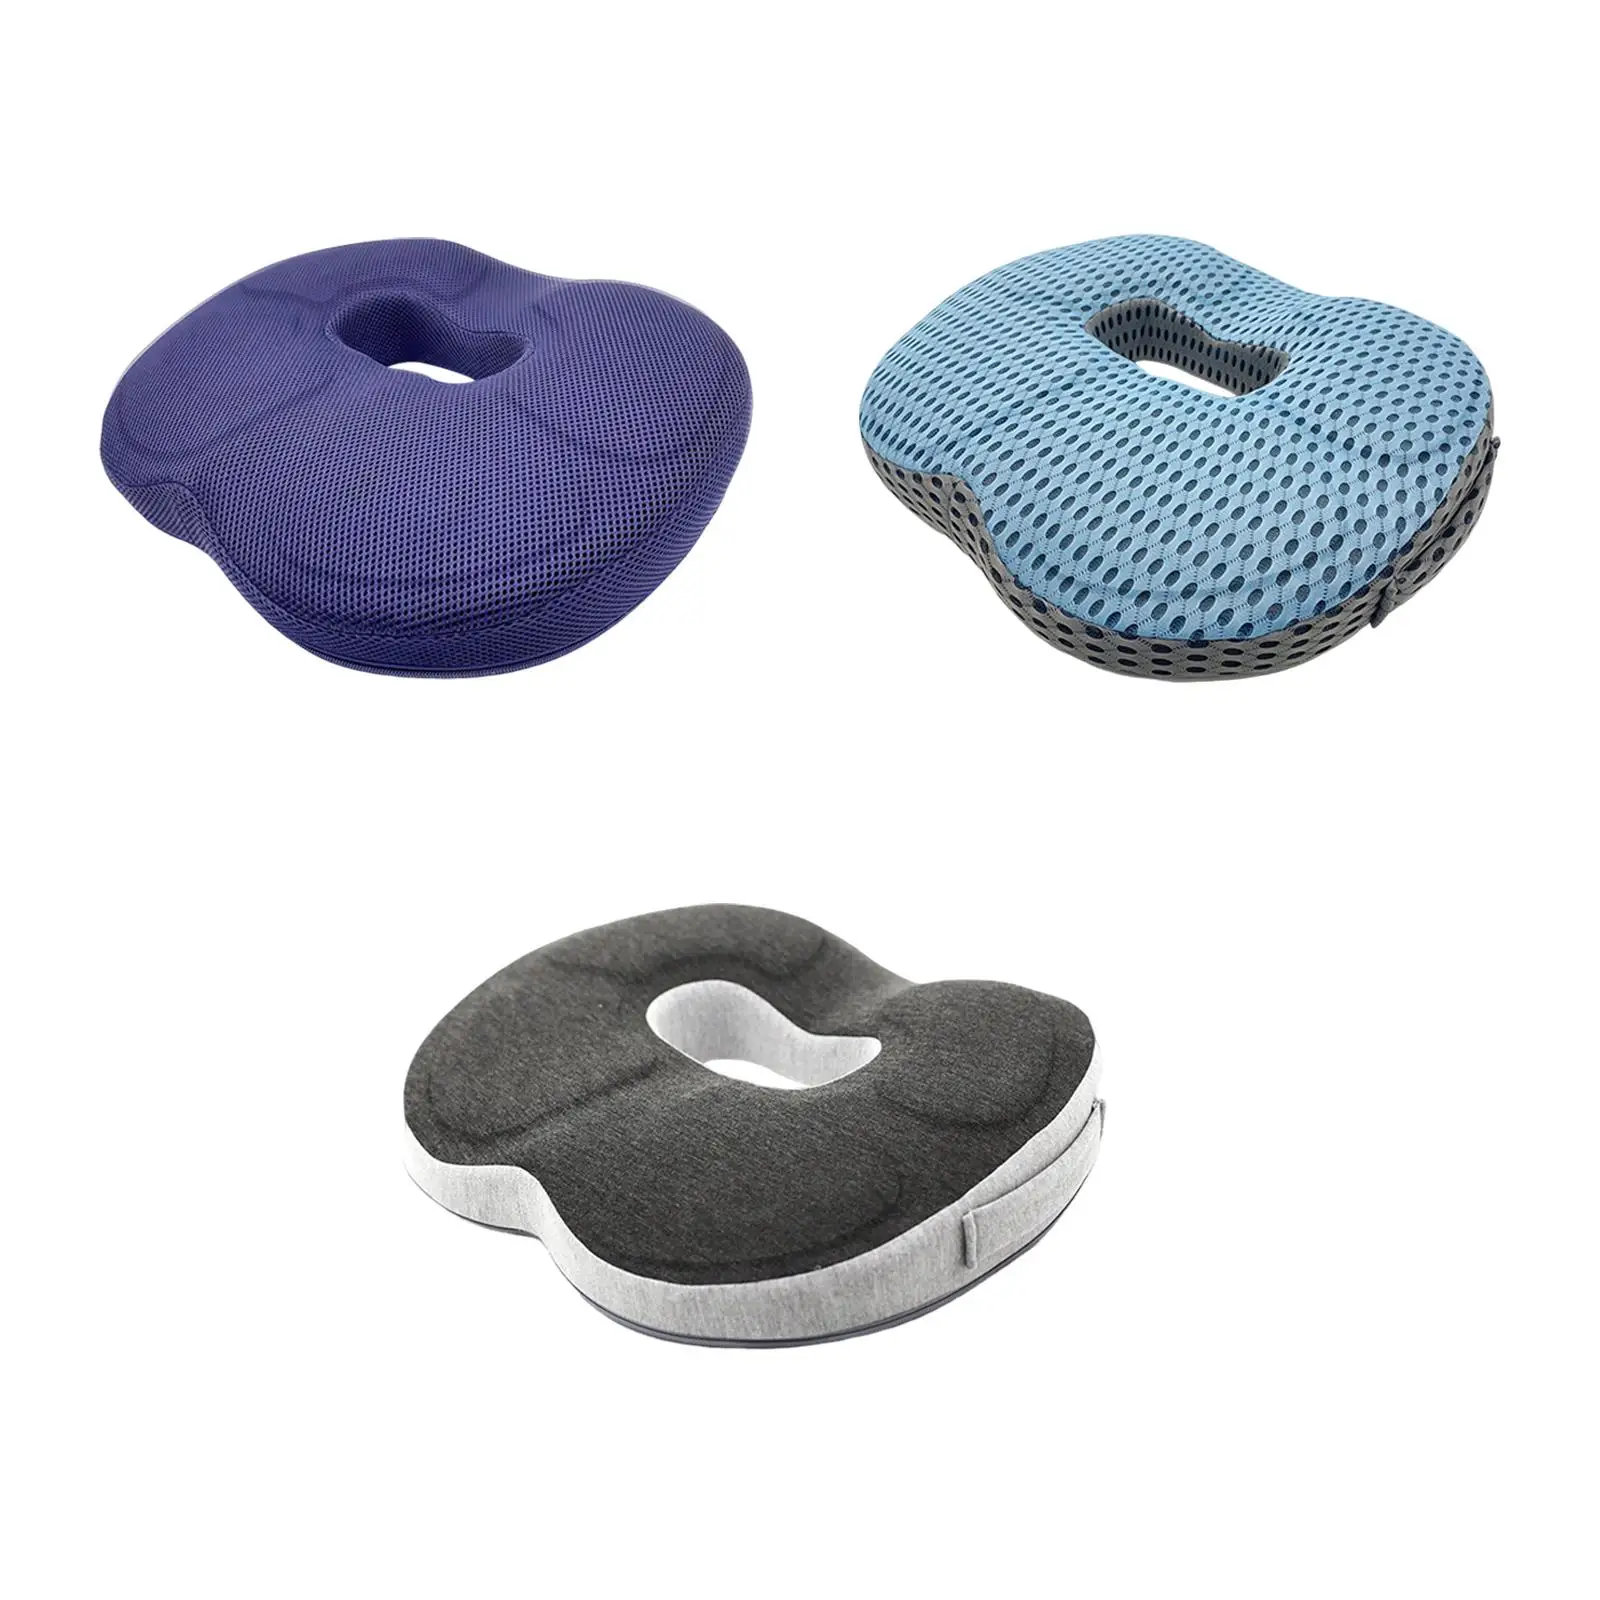 Breathable Donut Seat Cushion Comfortable Washable Cover Donut Pillow Chair Cushion Seat Cushion for Travel car Chair